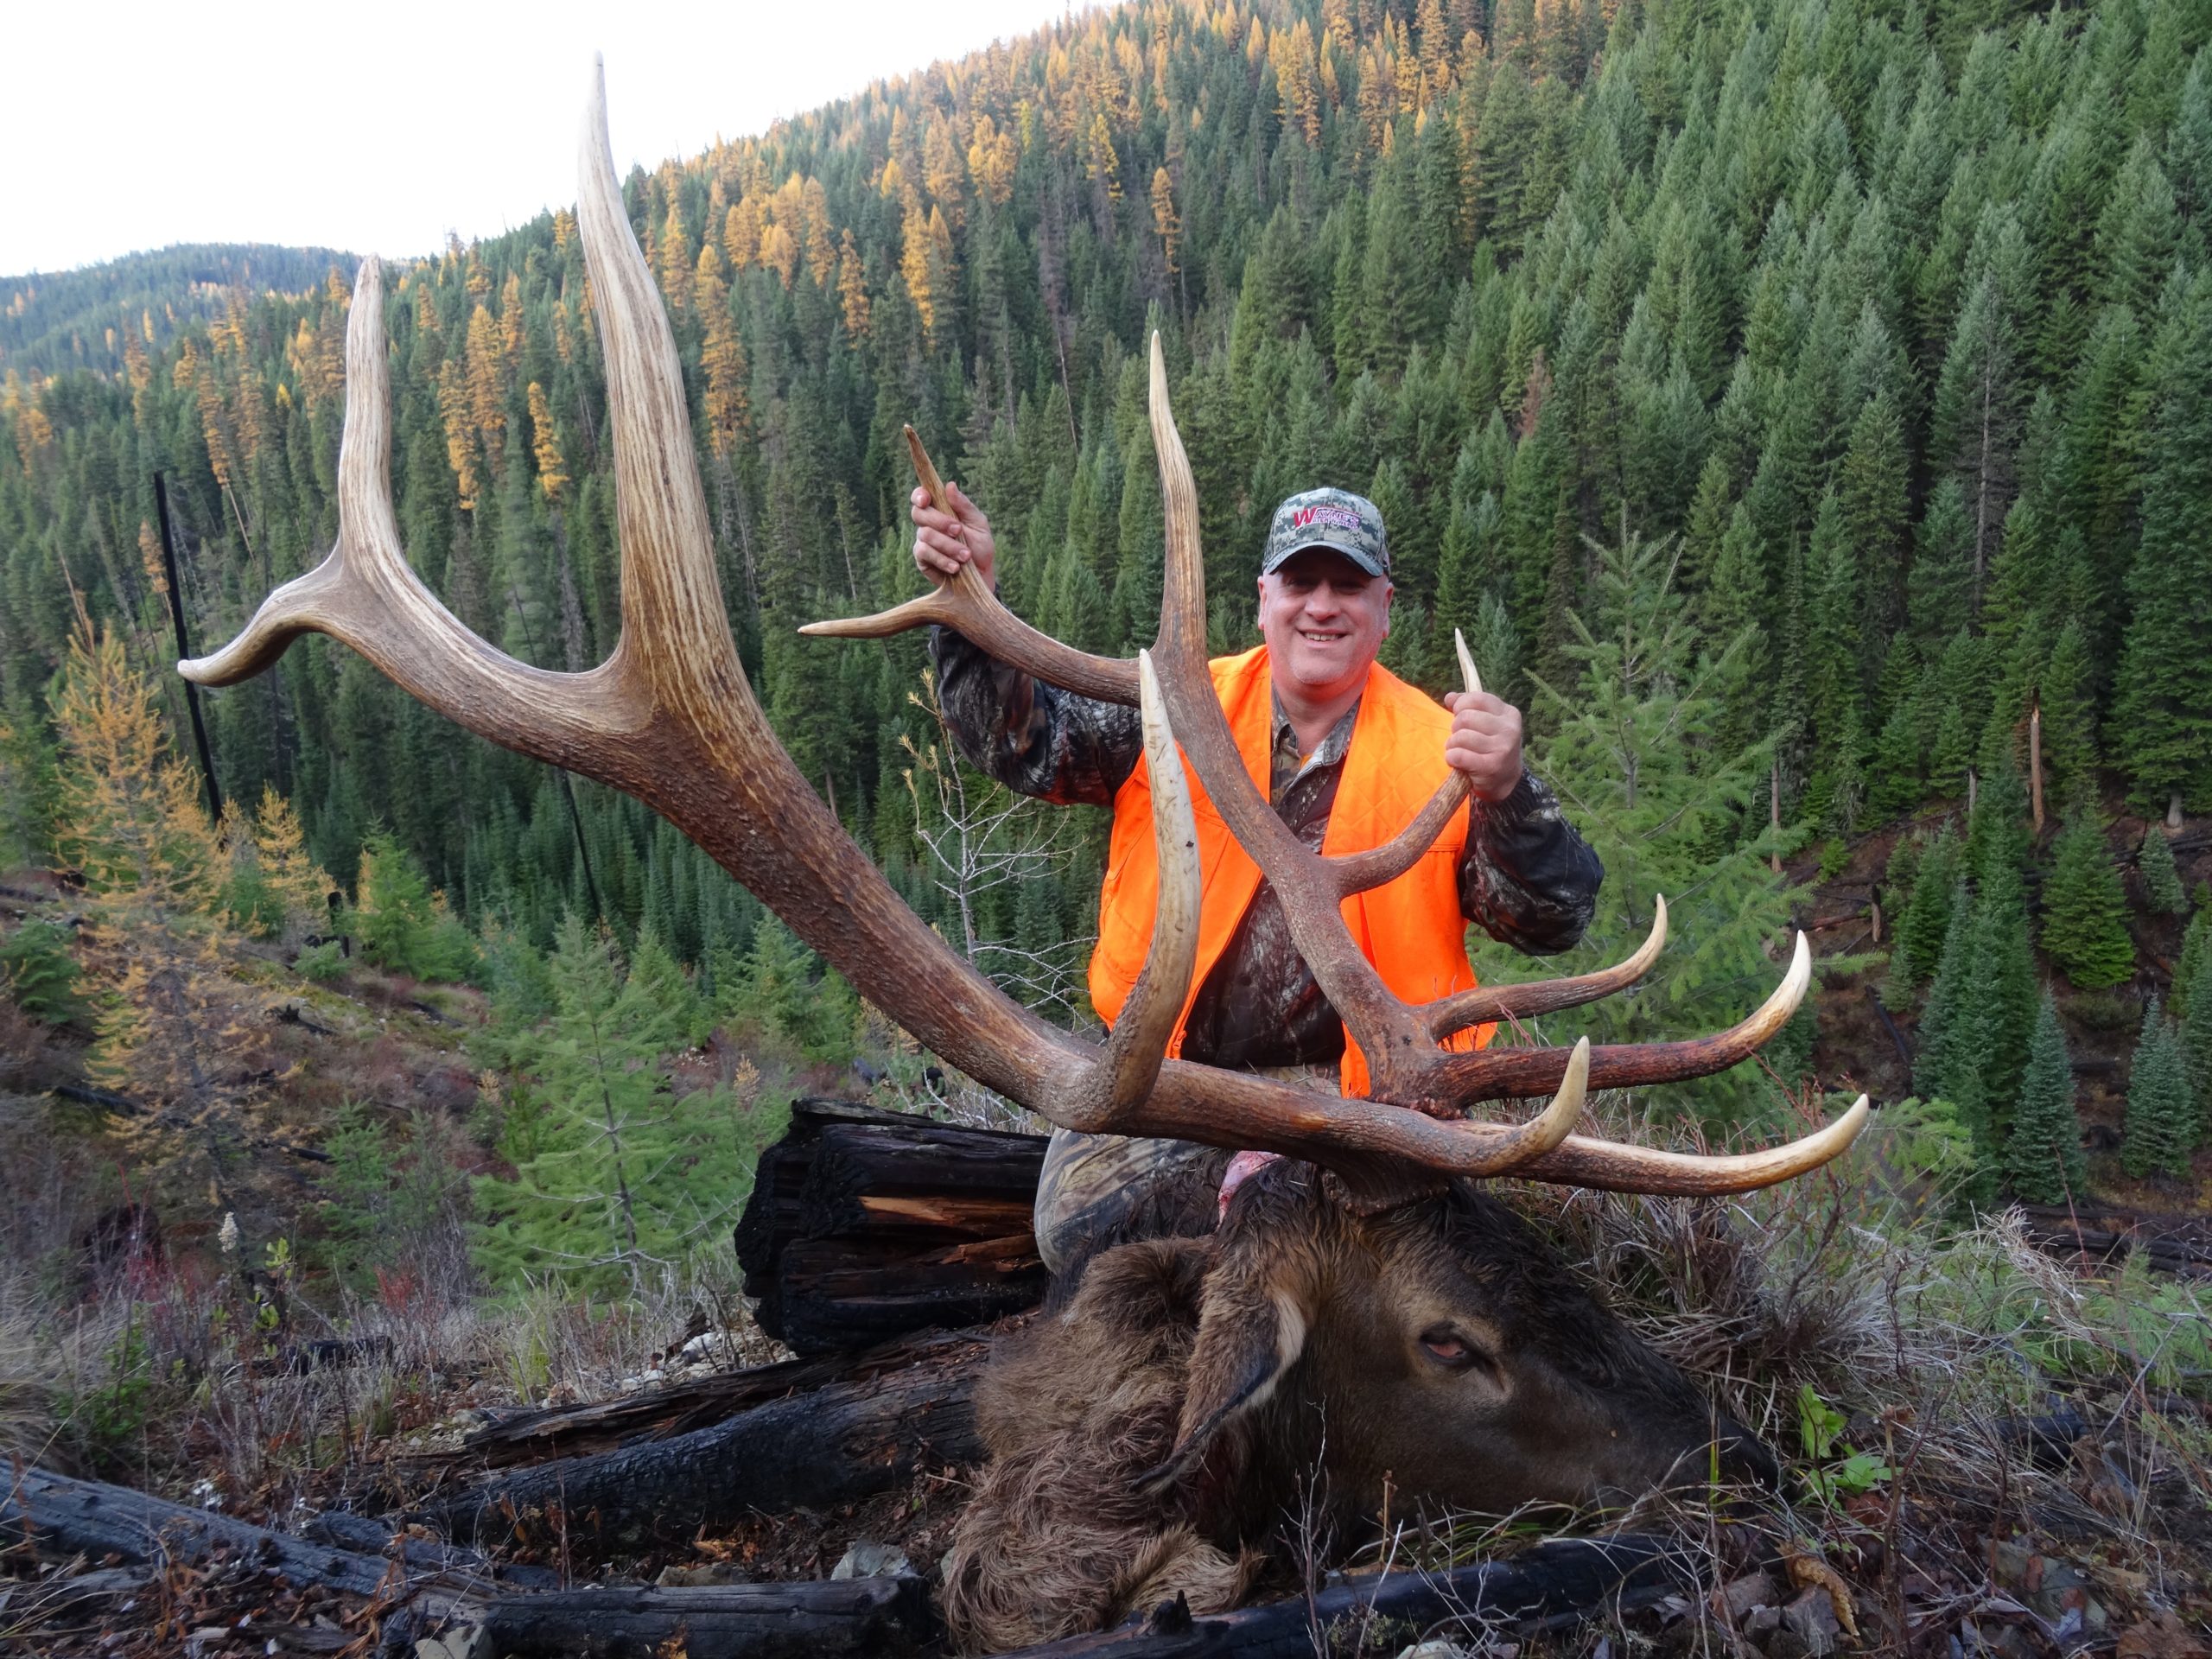 Rifle Elk Best Hunts Montana Hunting Outfitter